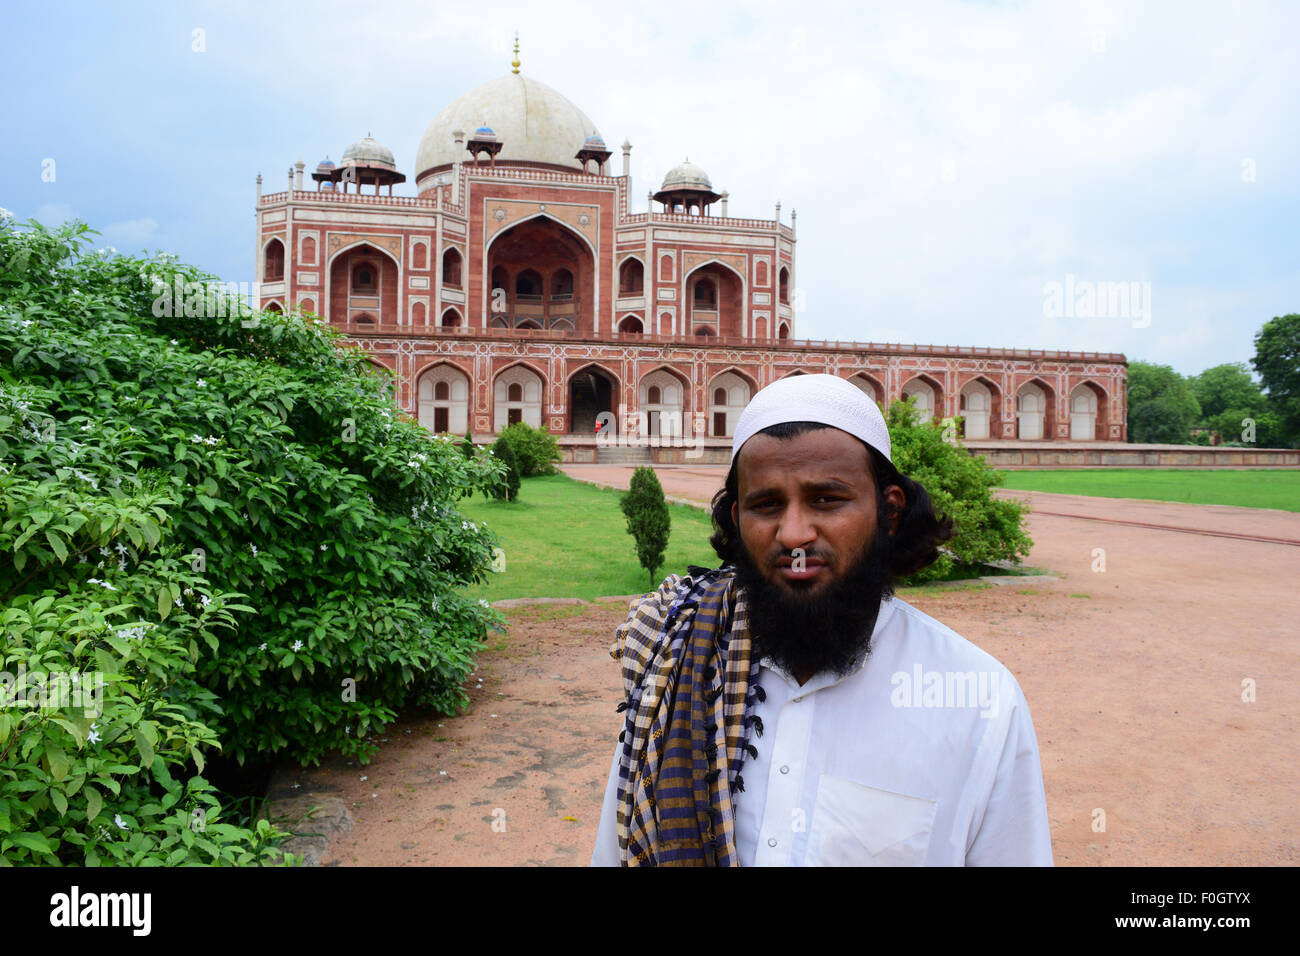 Muslim Man in Traditional Islamic Dressing India in front of Humayun's Tomb Monument Delhi Stock Photo